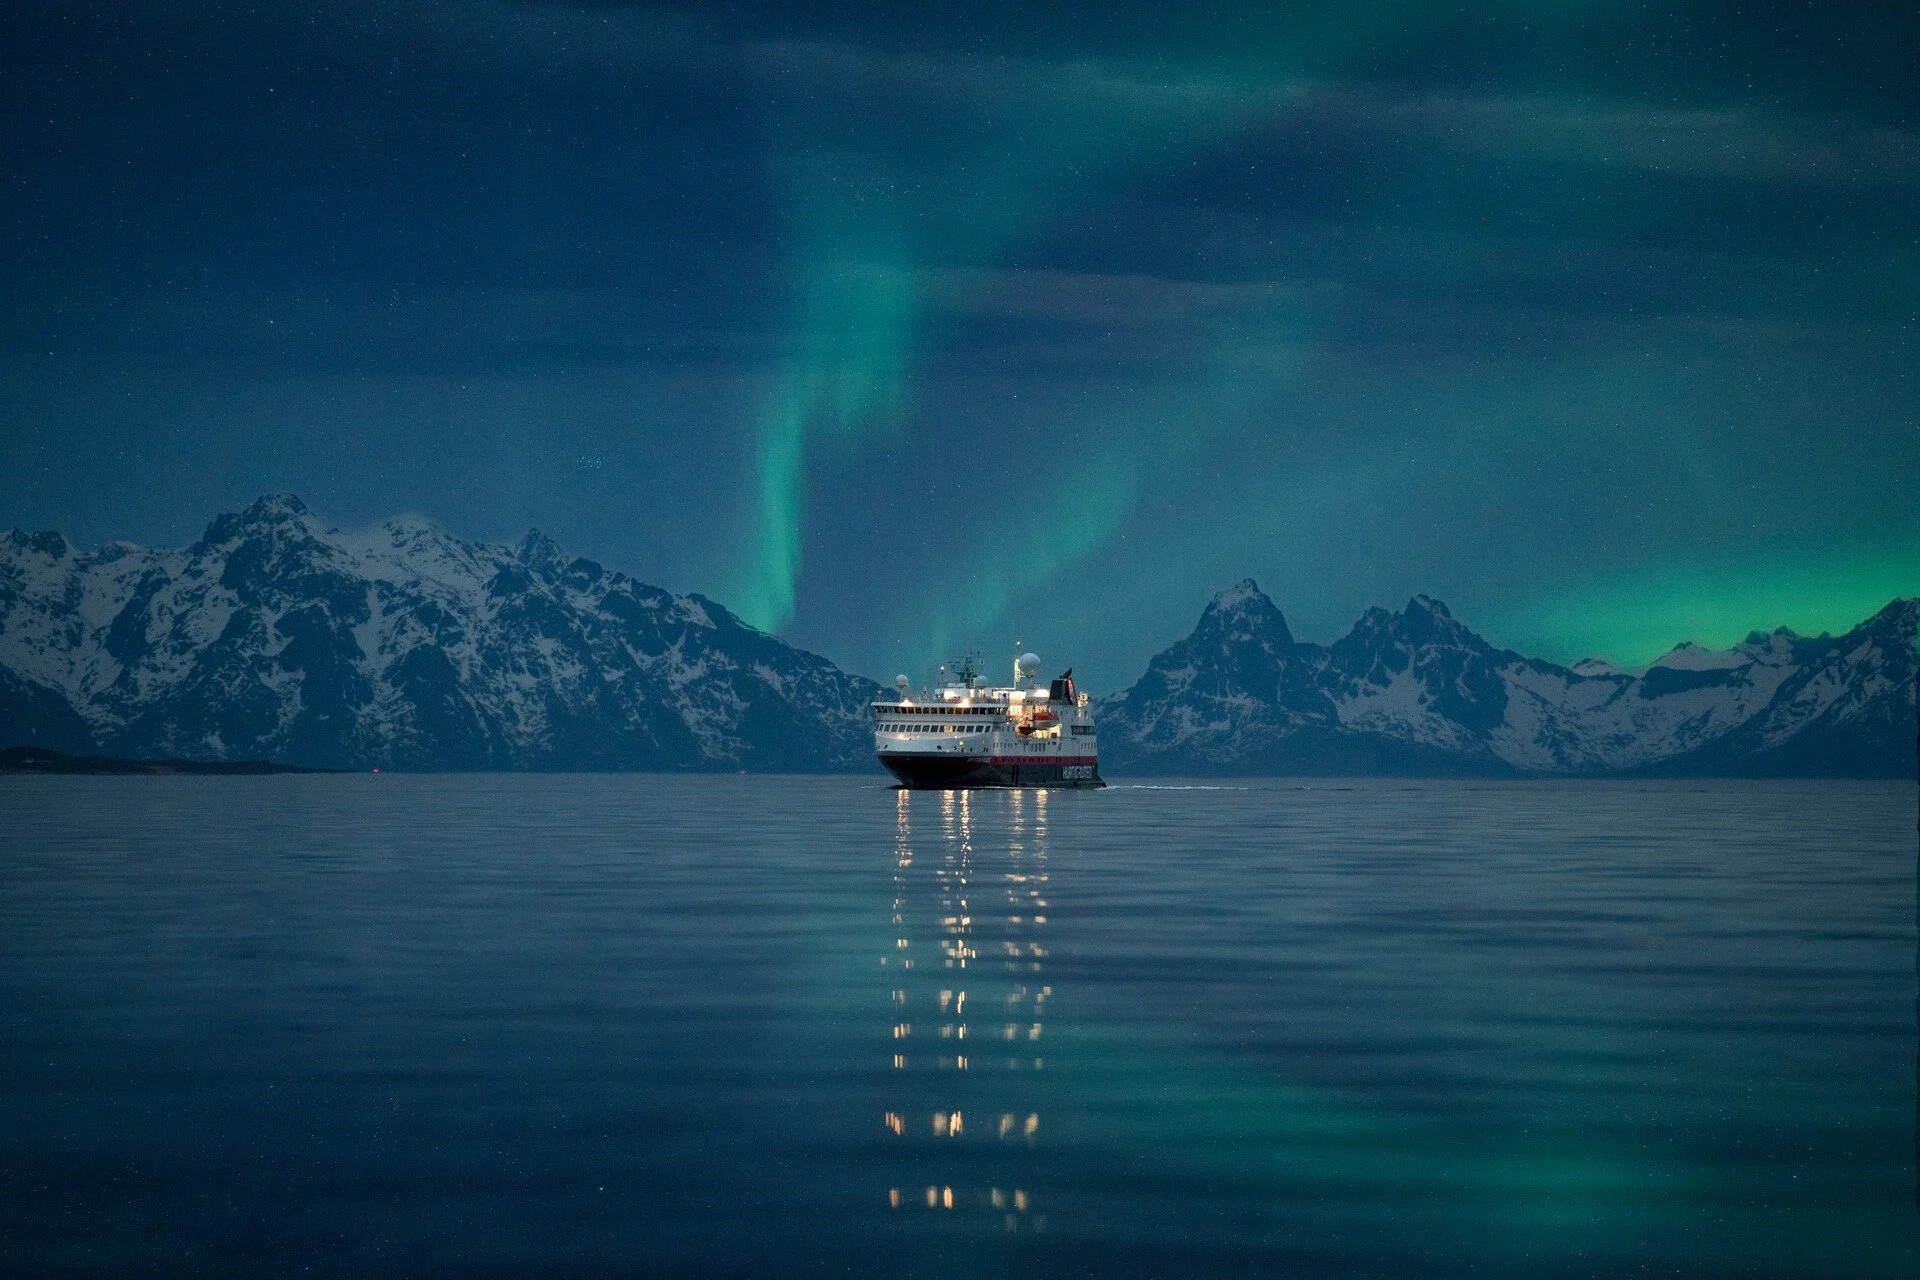 A Hurtigruten ship sailing in Norway with the Northern Lights above